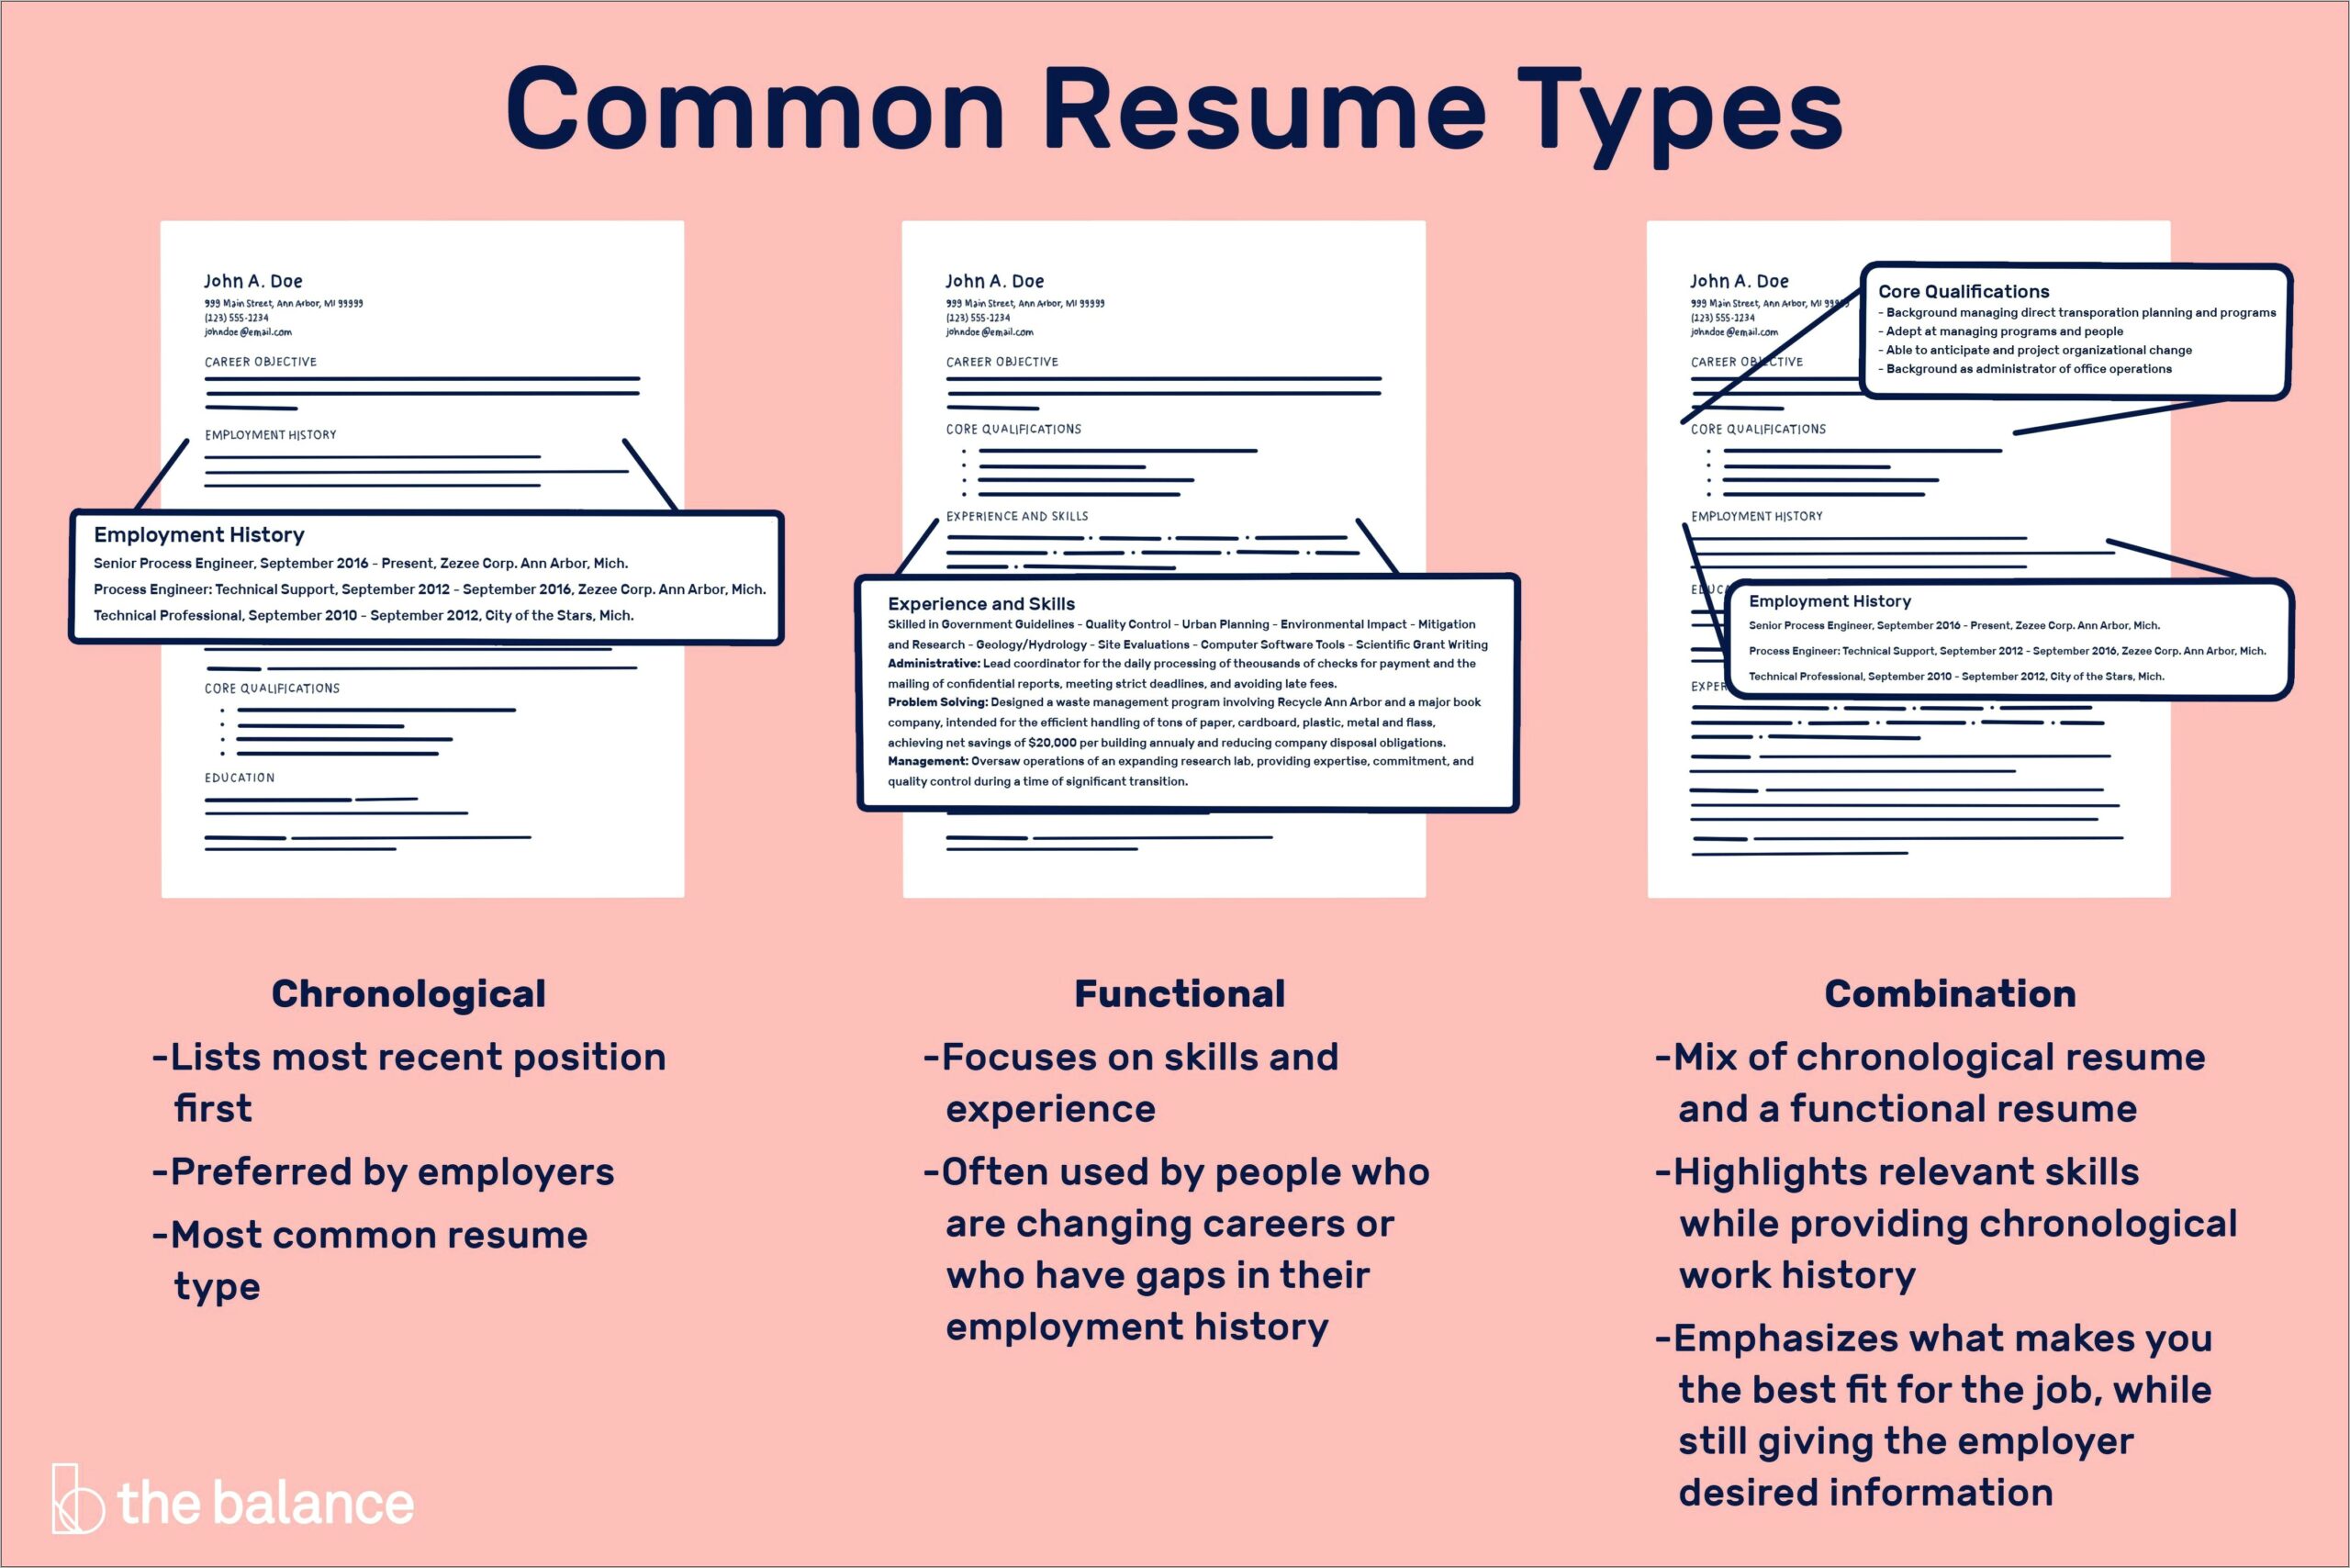 Should Resumes Only Focus On Specific Jobs